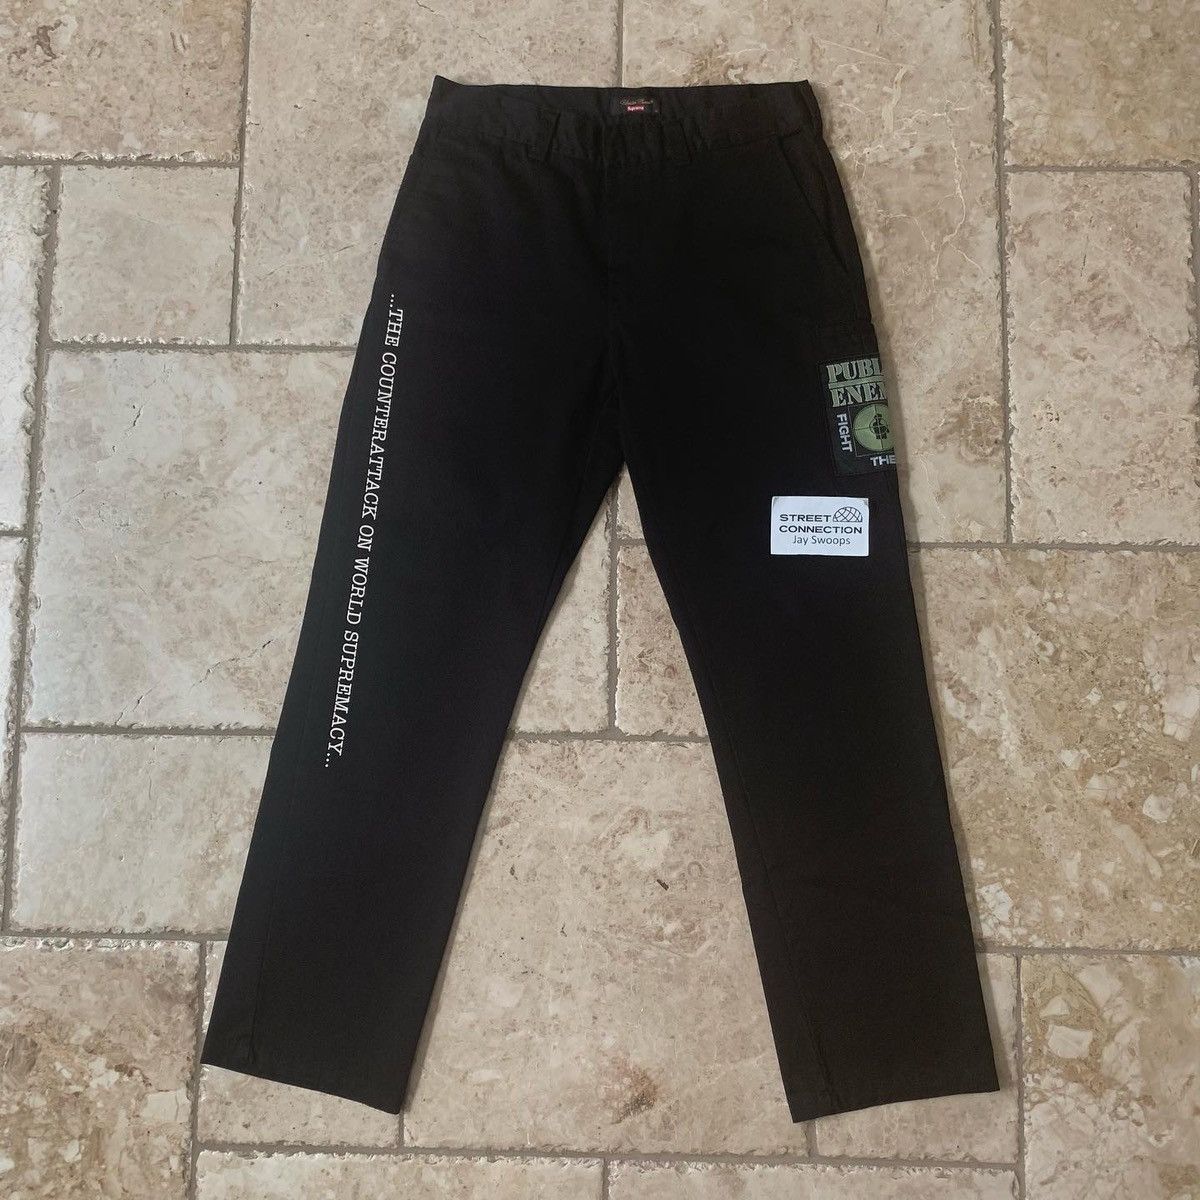 Supreme Undercover Work Pants | Grailed